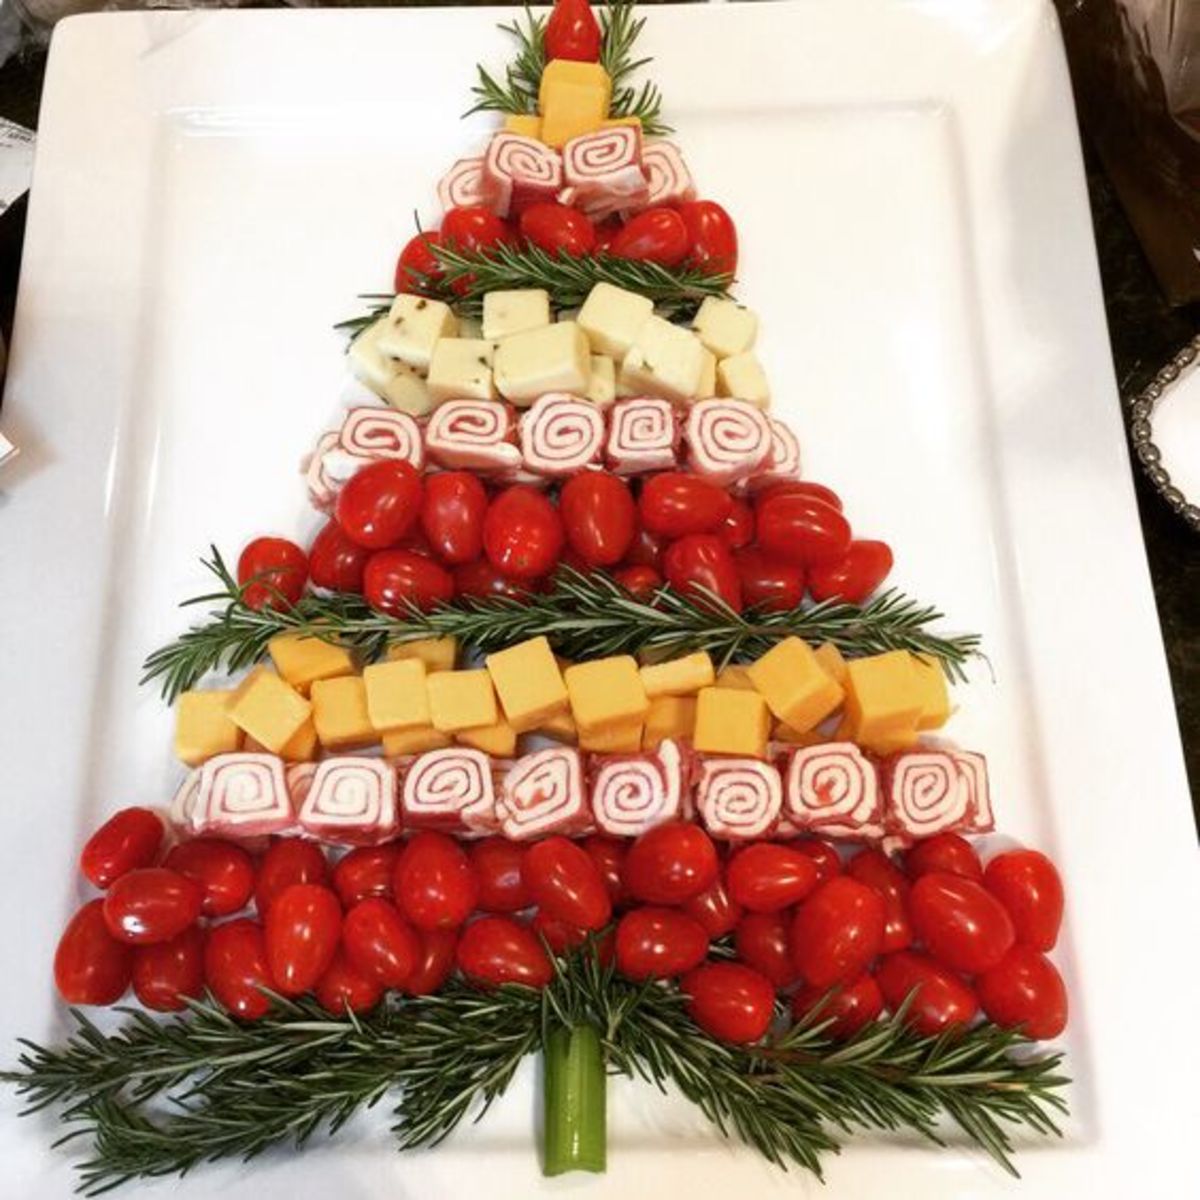 Christmas tree cheese platter with rolled-up meats